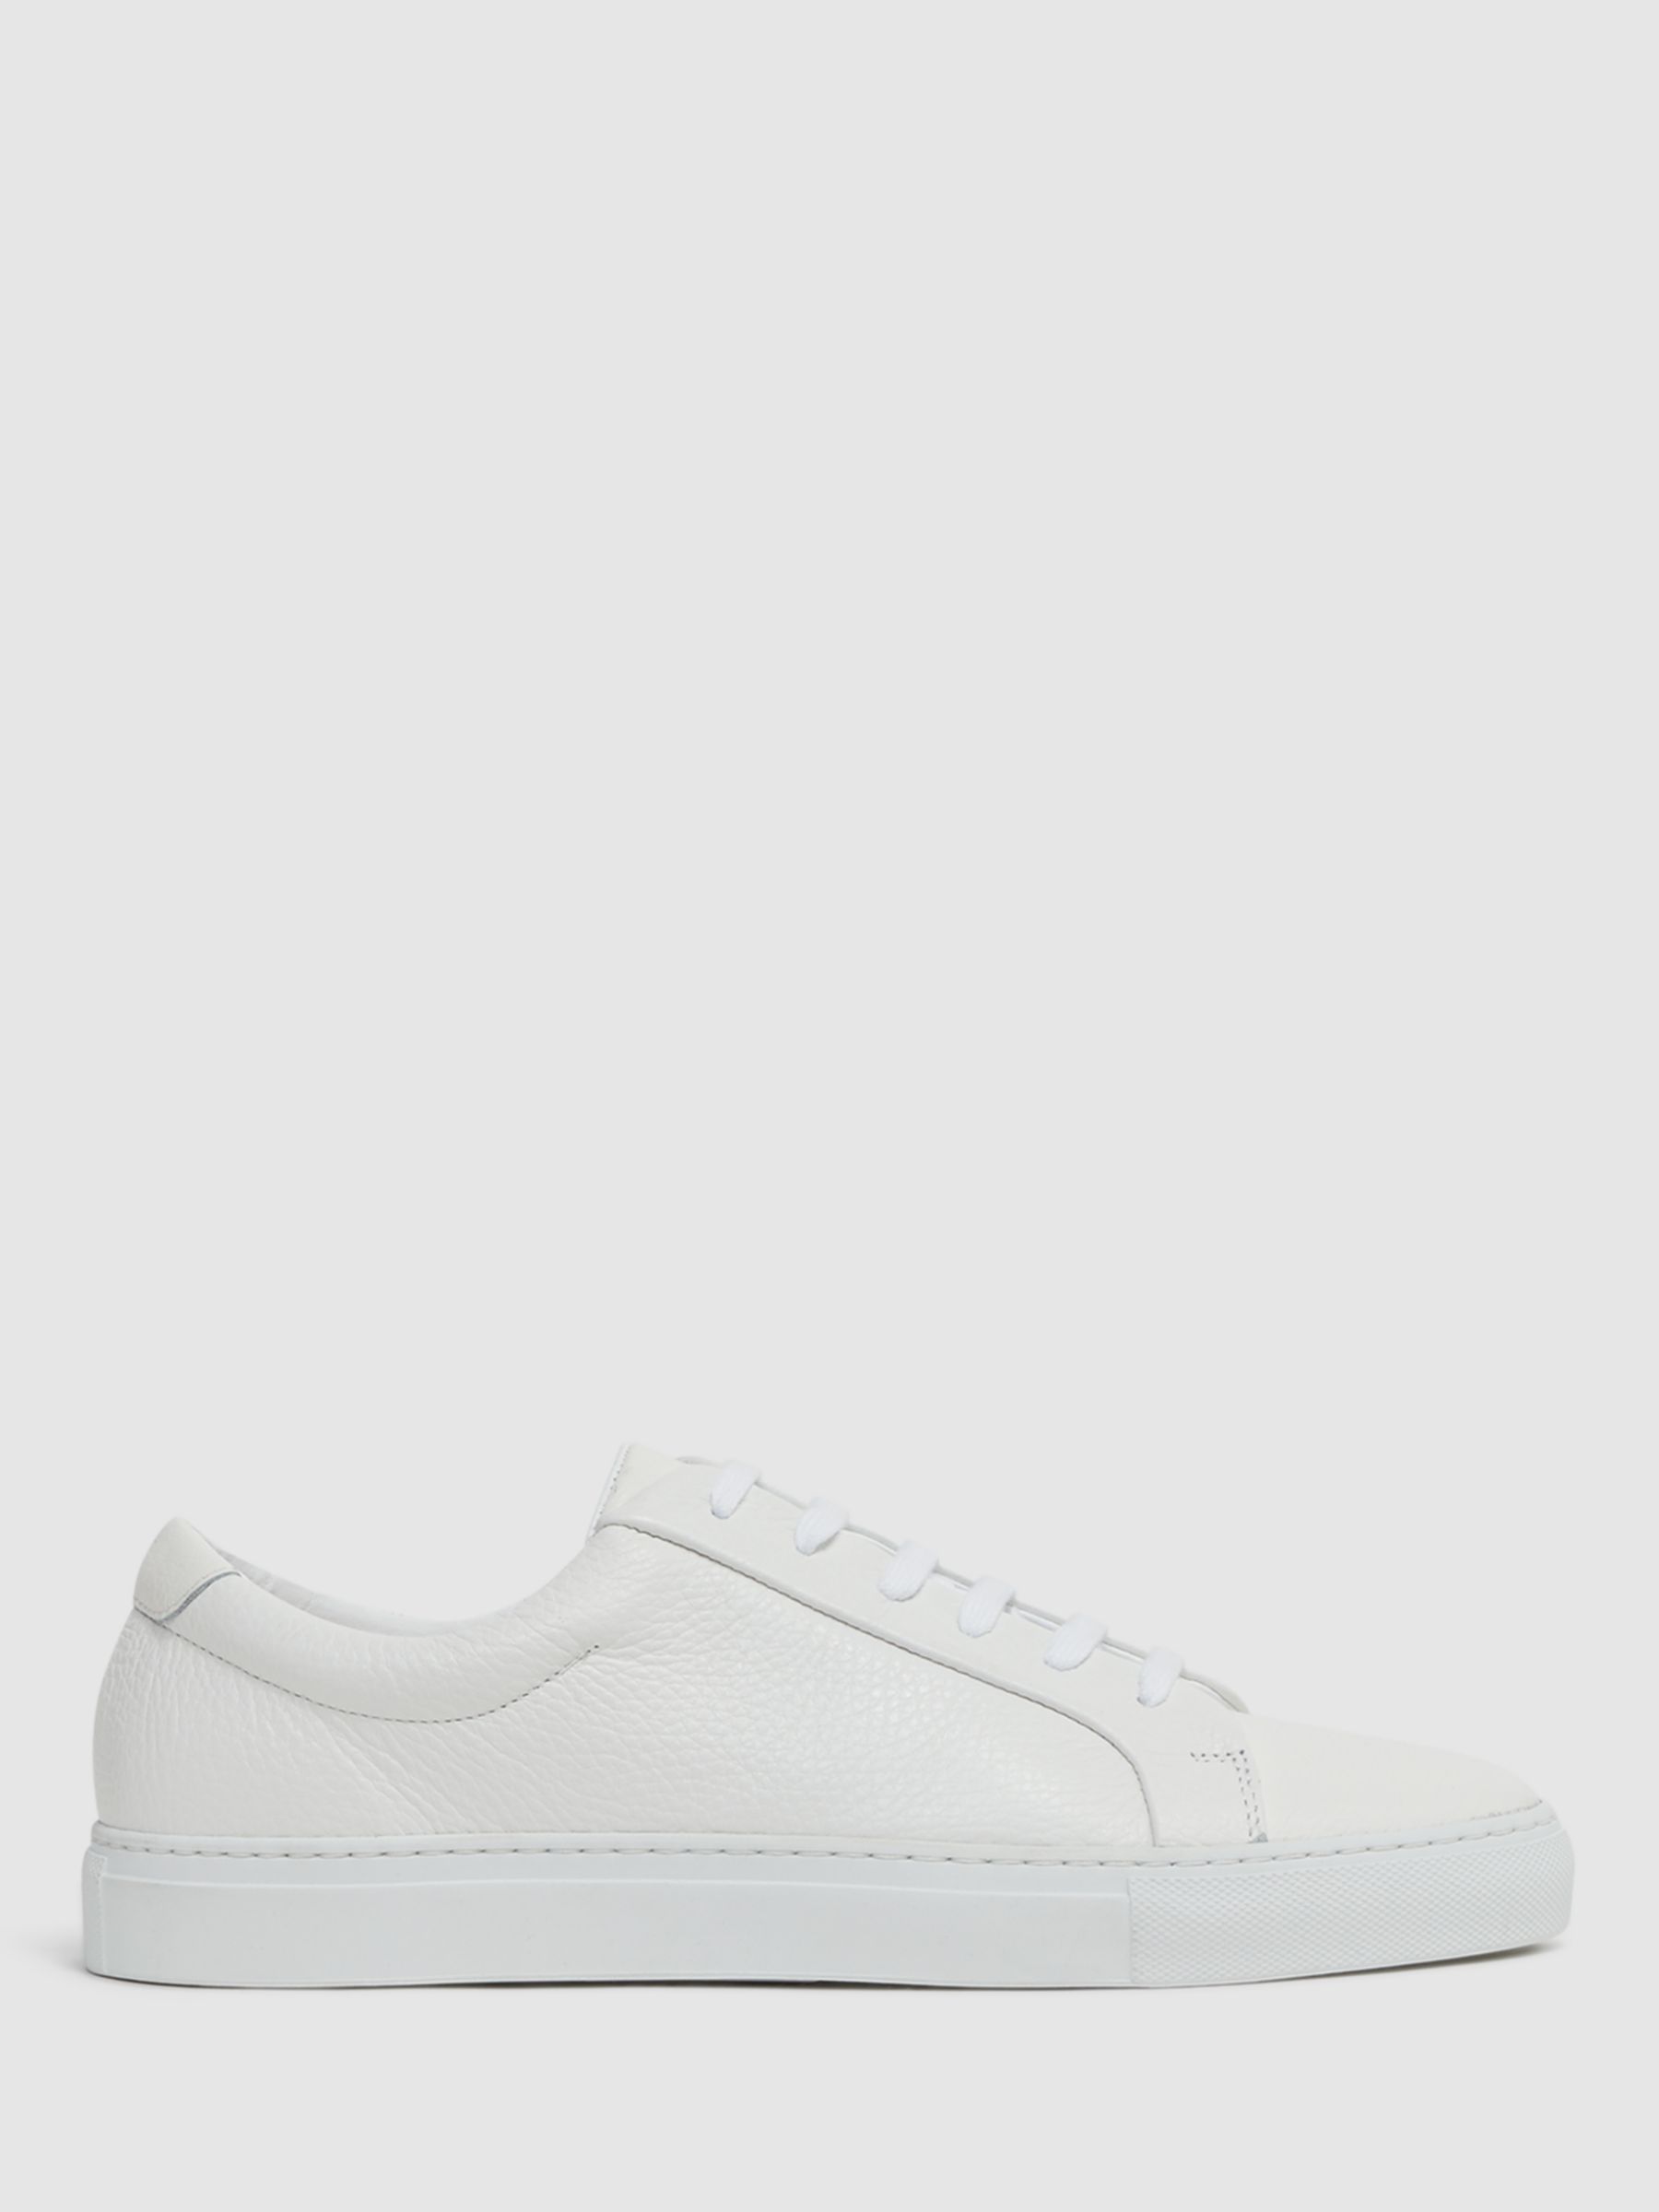 Reiss Luca Tumbled Trainer, White at John Lewis & Partners